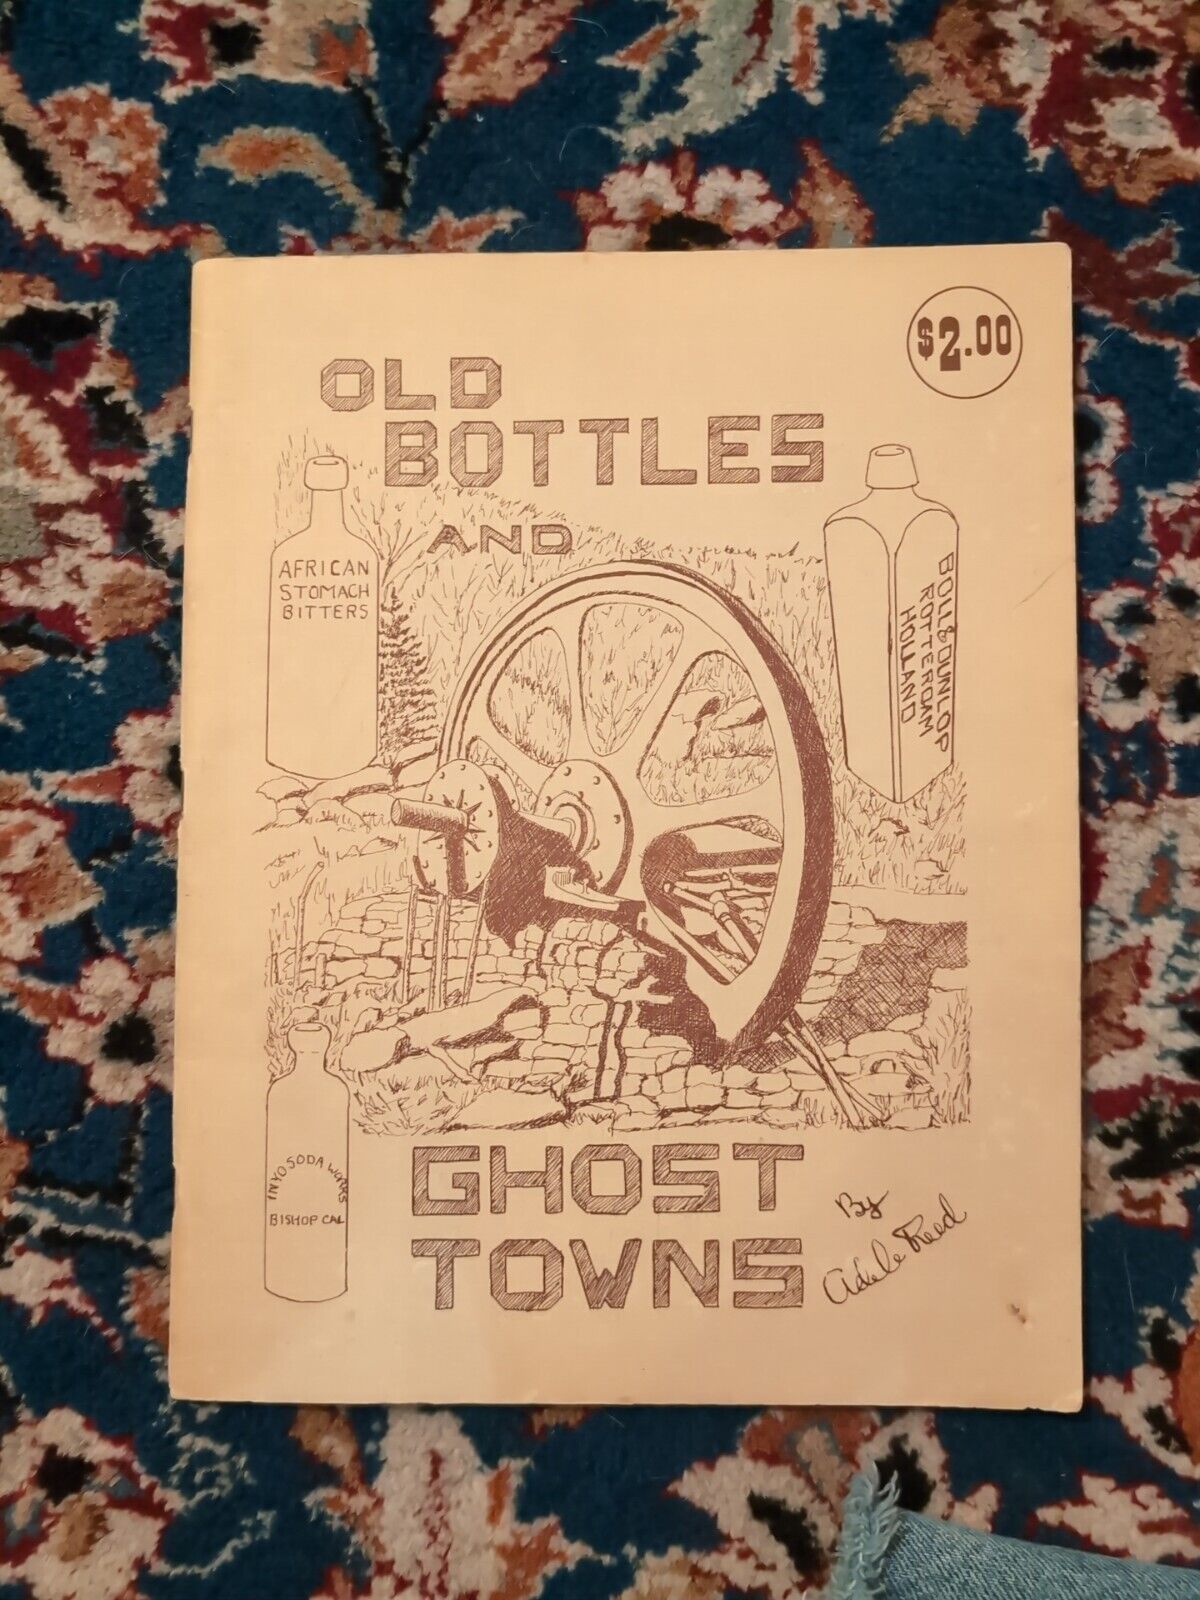 Signed Copy - Old bottles and ghost towns by Adele Reed (Bottle Identification)